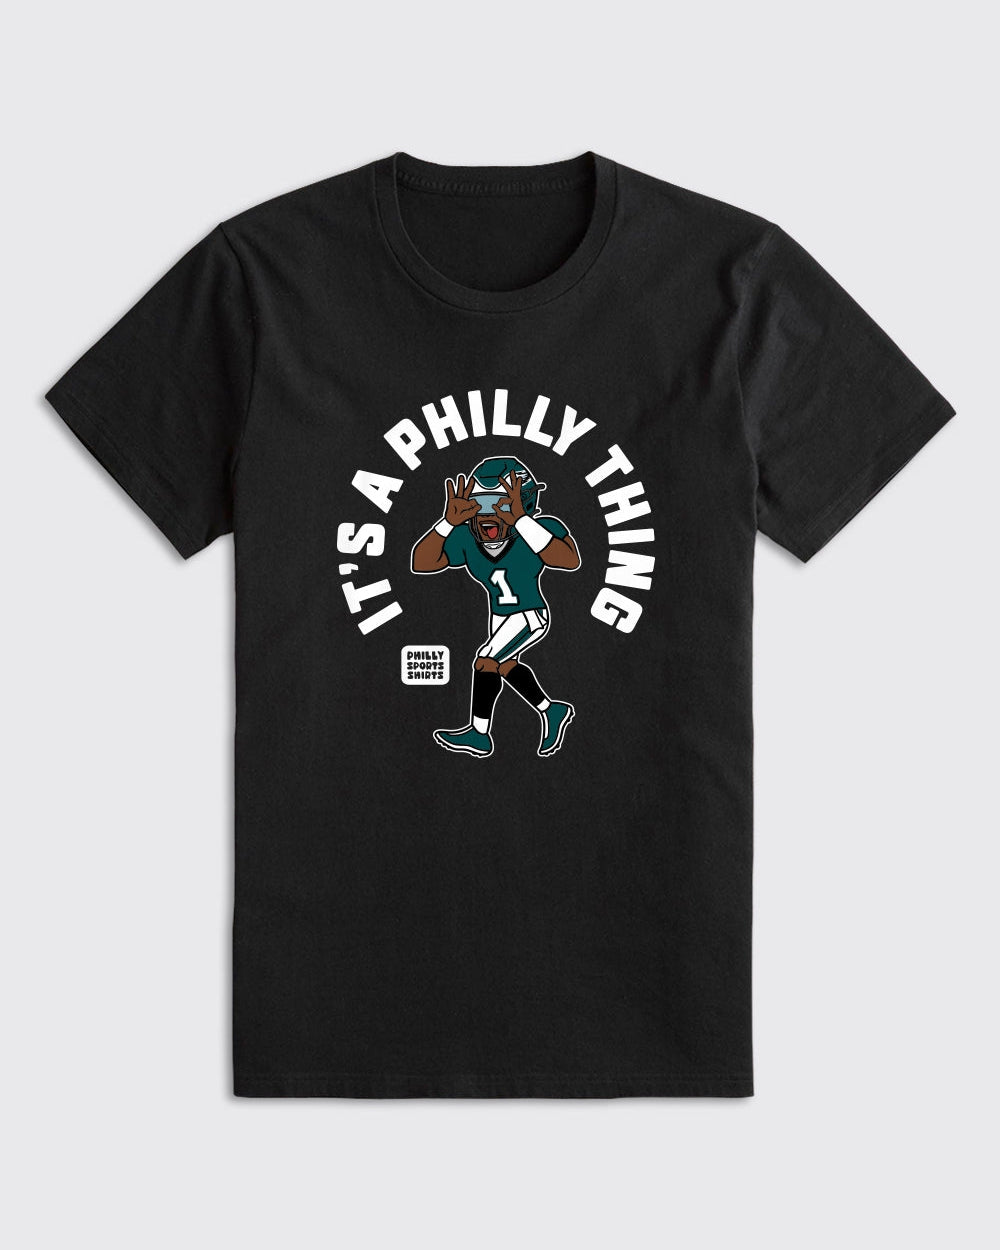 It's A Philly Thing Shirt - Eagles, T-Shirts - Philly Sports Shirts